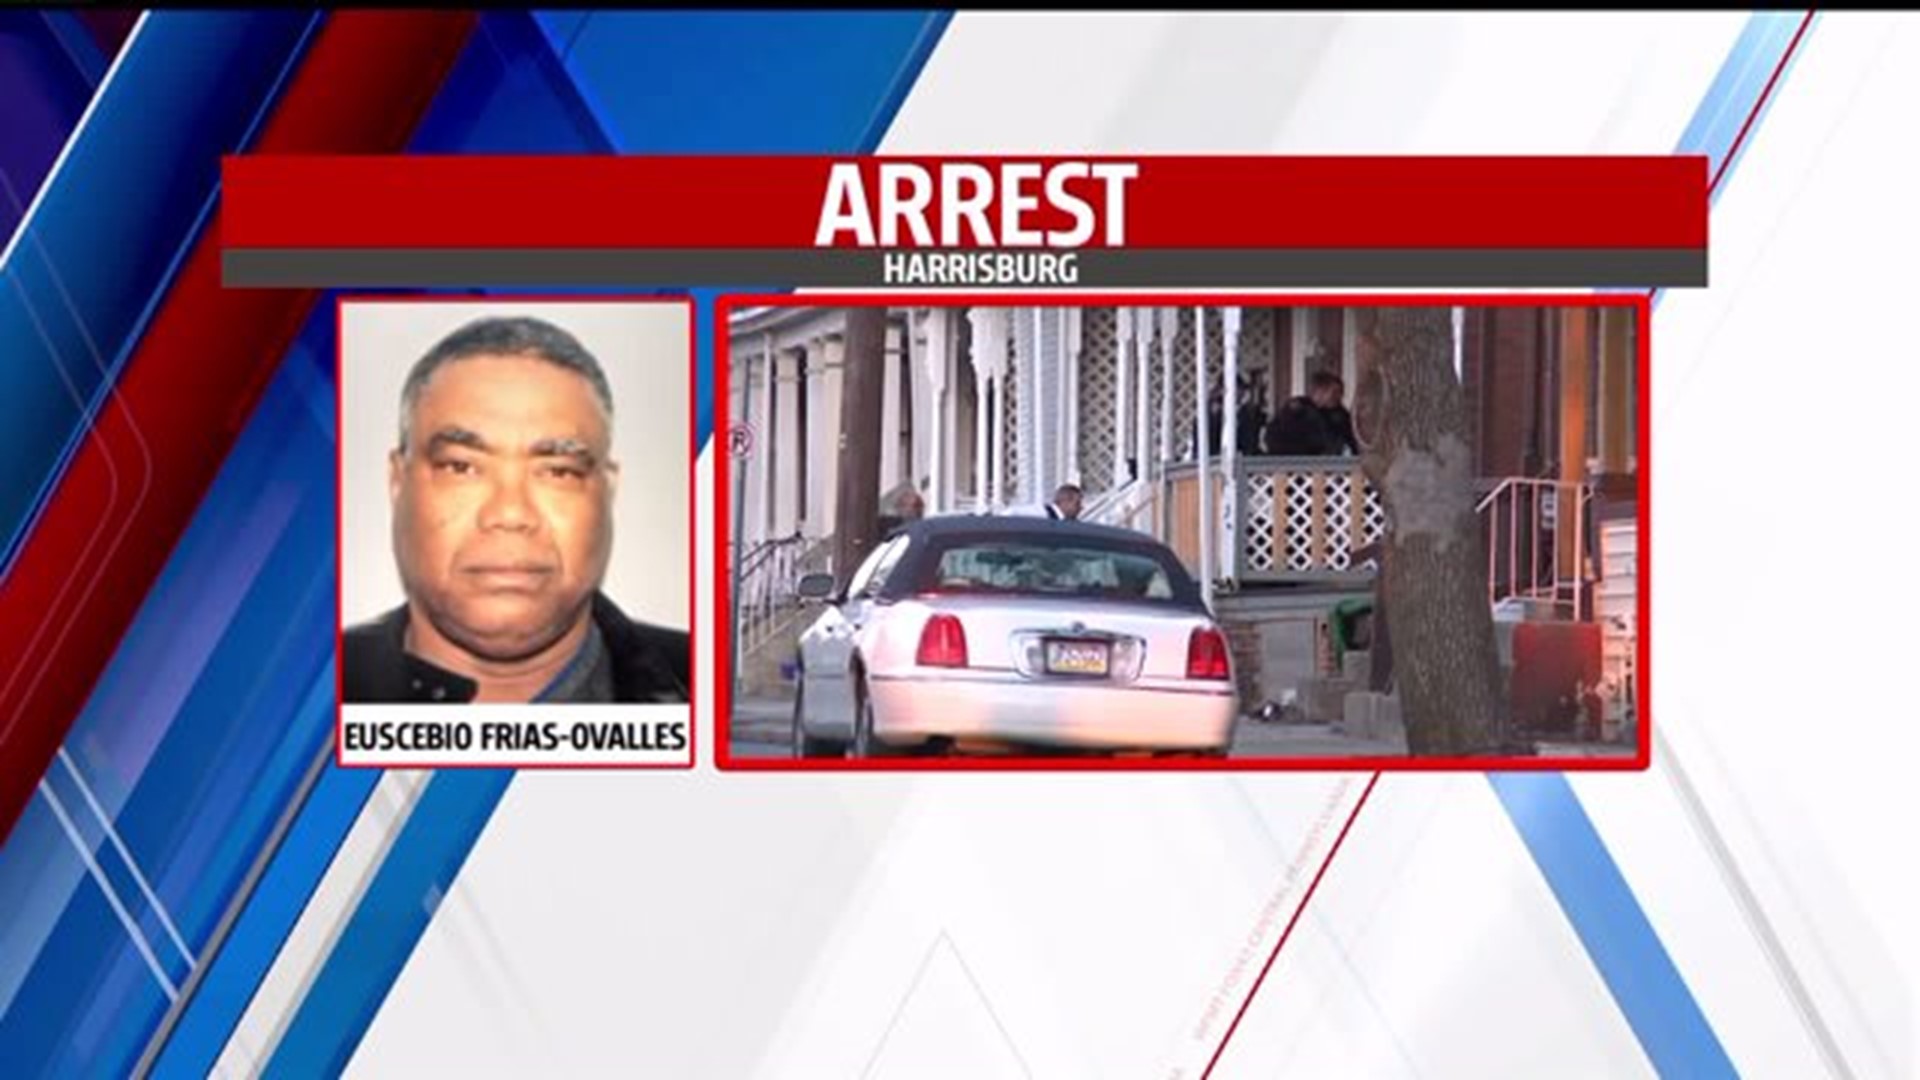 Man arrested in Hazelton after shooting at 6 students in Harrisburg last month, police say